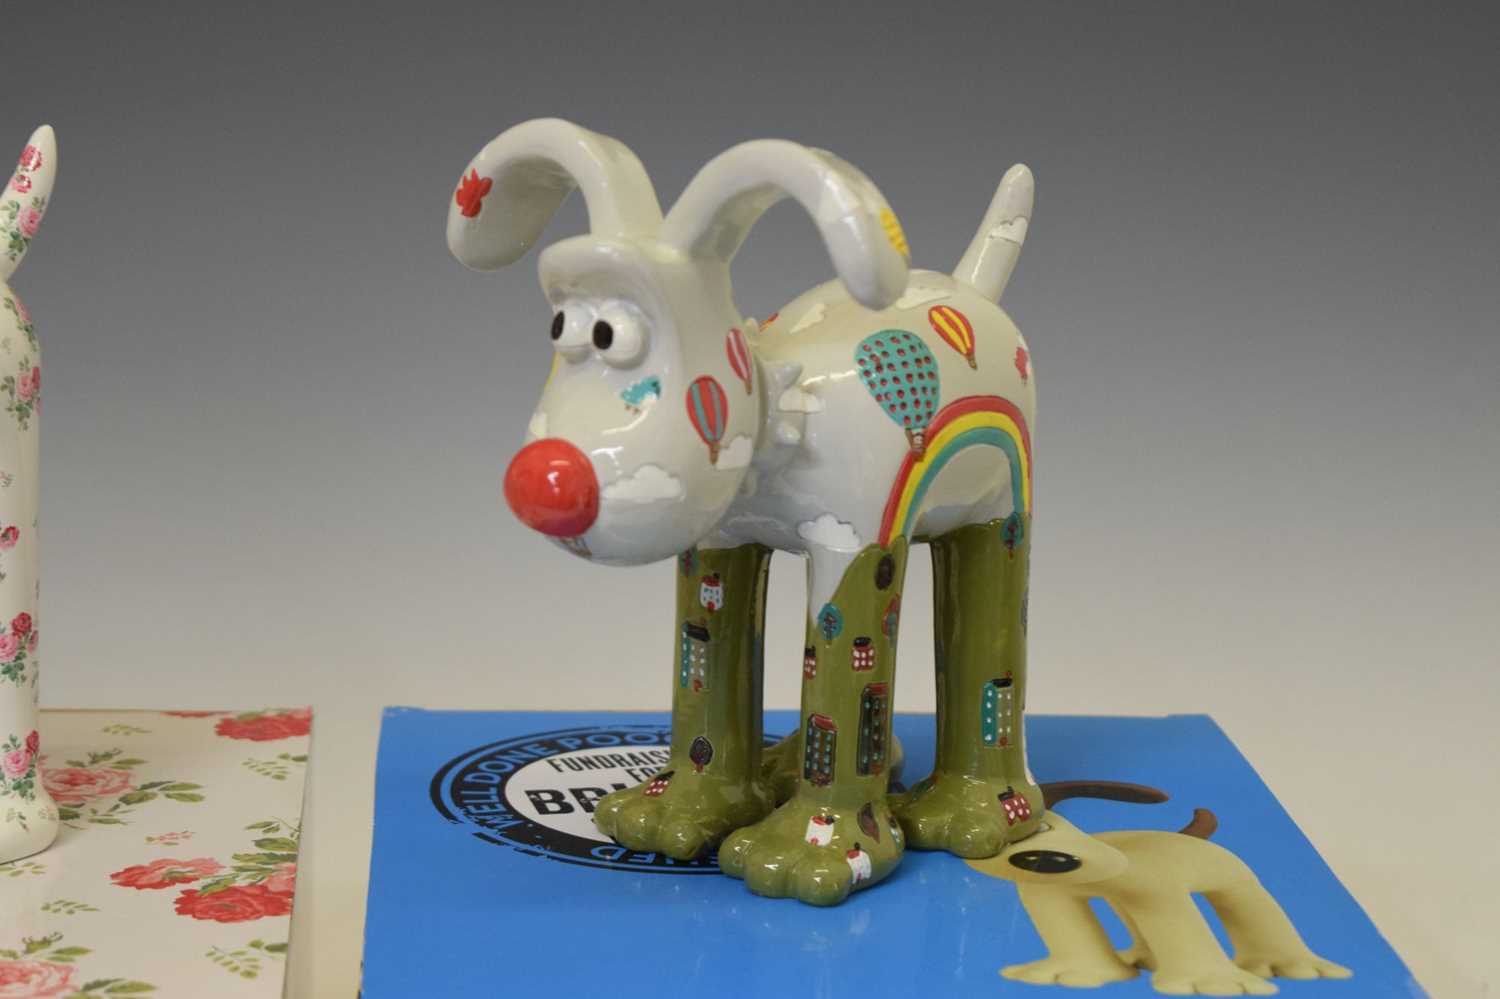 Aardman/Wallace and Gromit - 'Gromit Unleashed' figures - Image 6 of 11